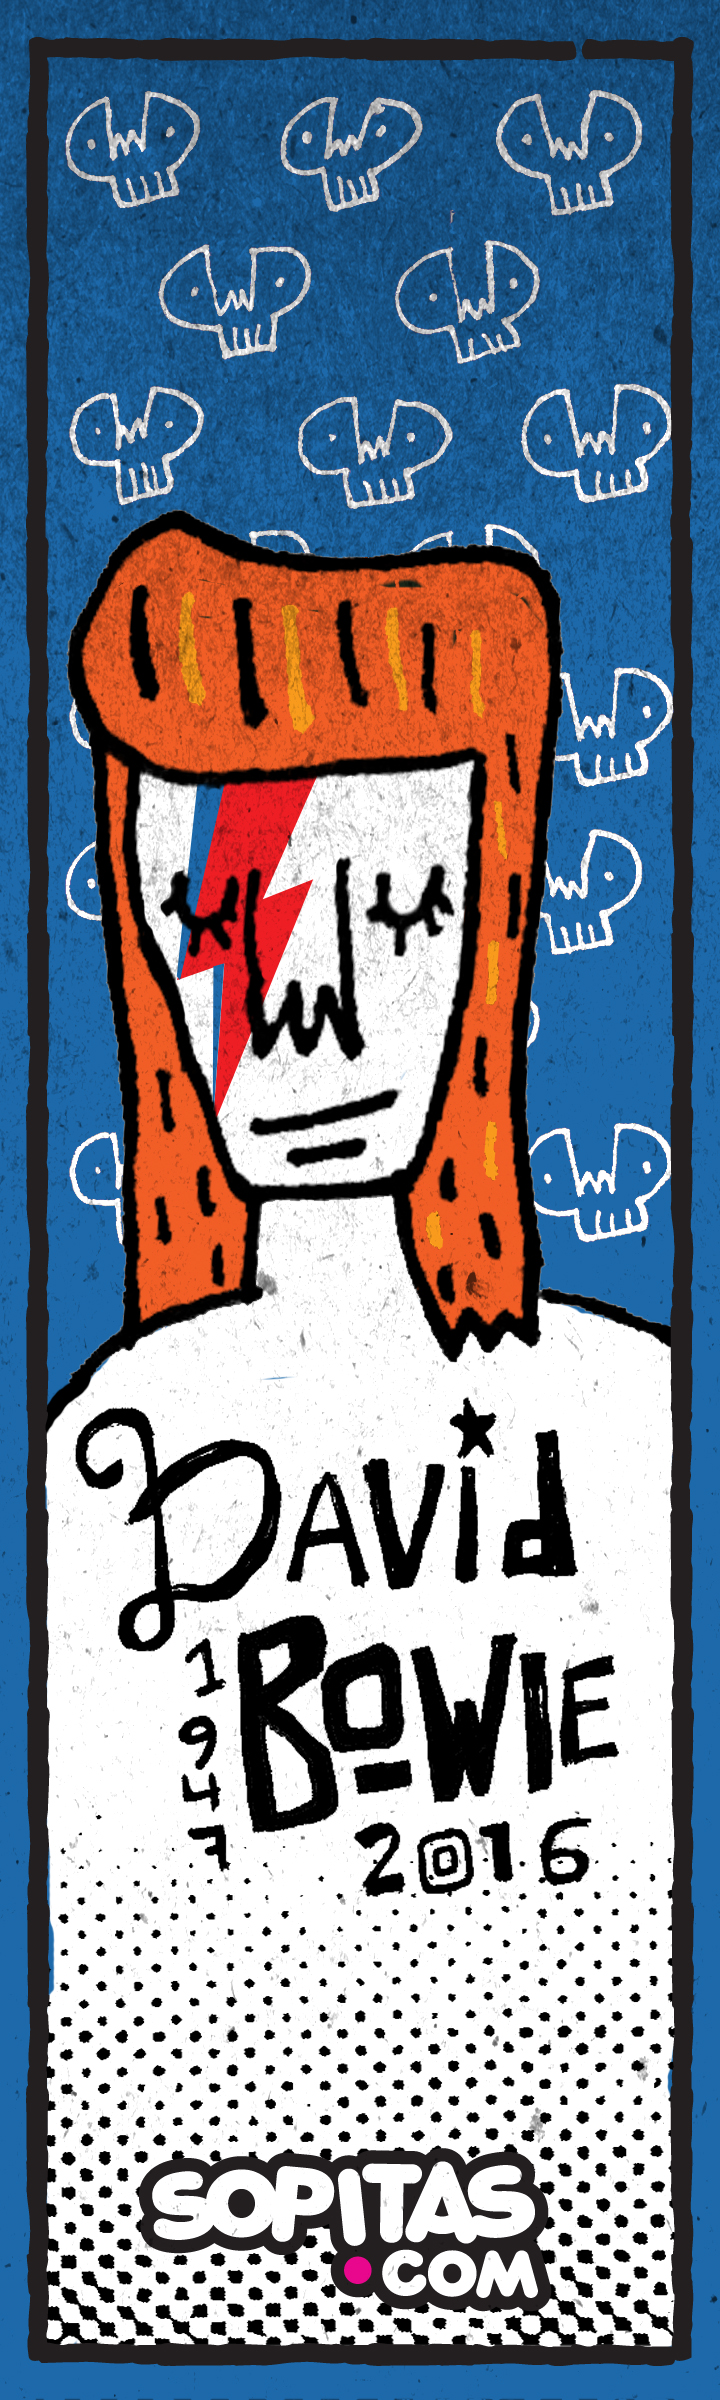 Bowie ofrenda musical